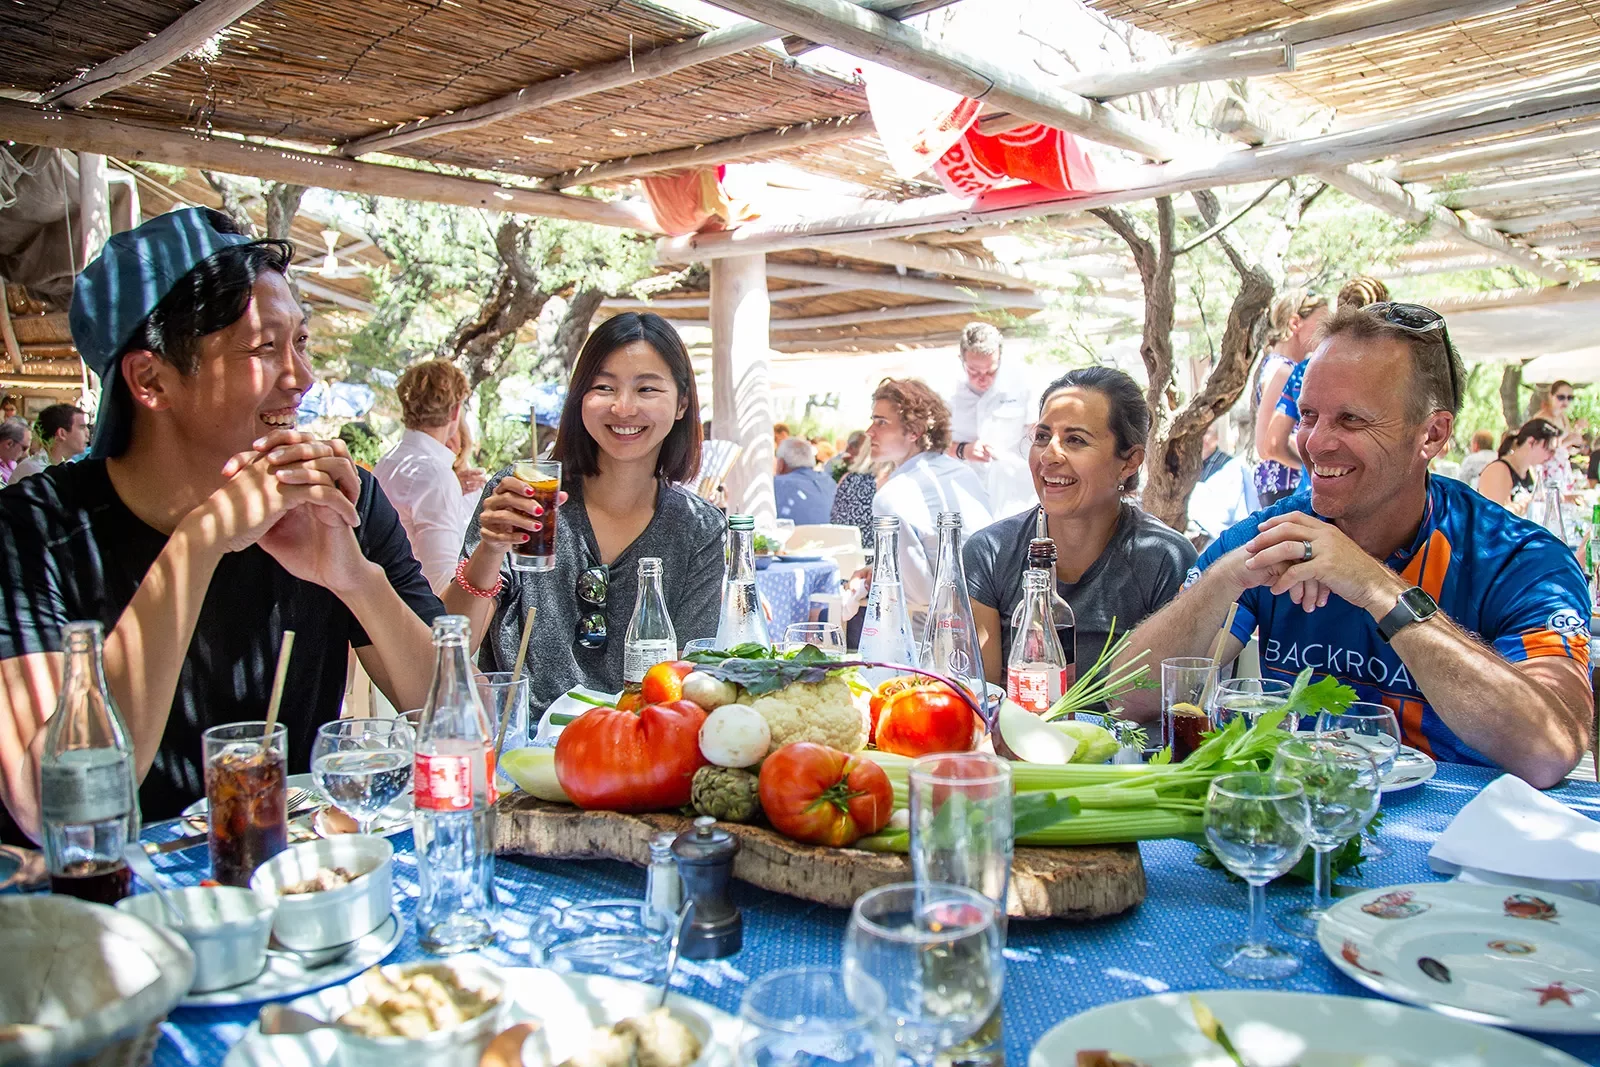 Group of Backroads guests enjoying an outdoor meal in France